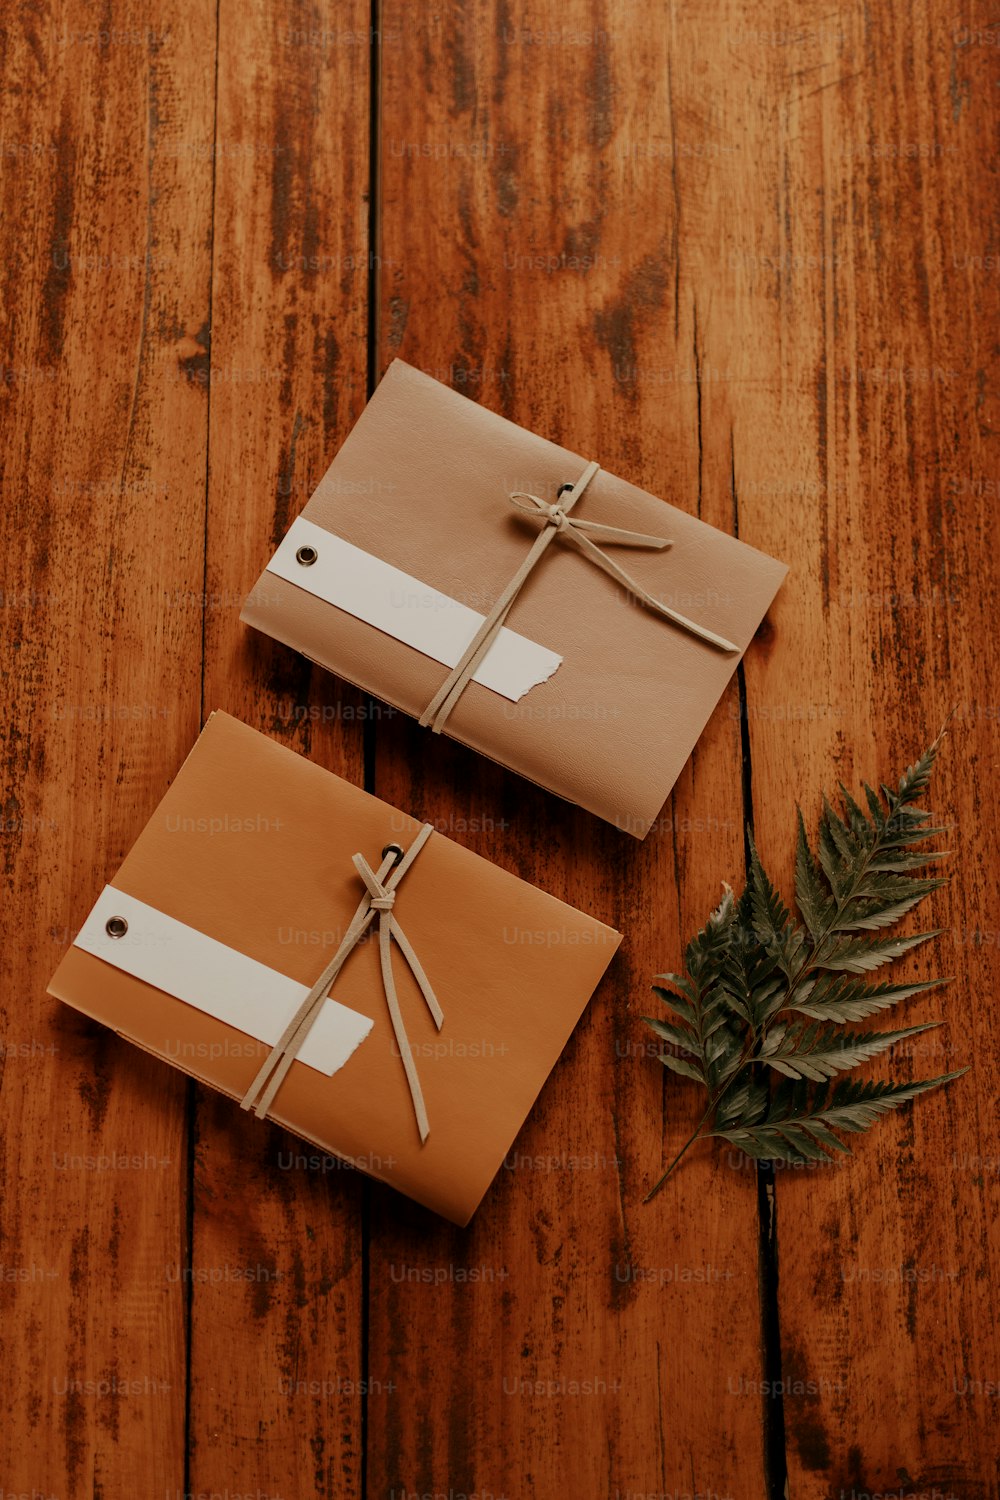 two wrapped presents on a wooden table with a plant